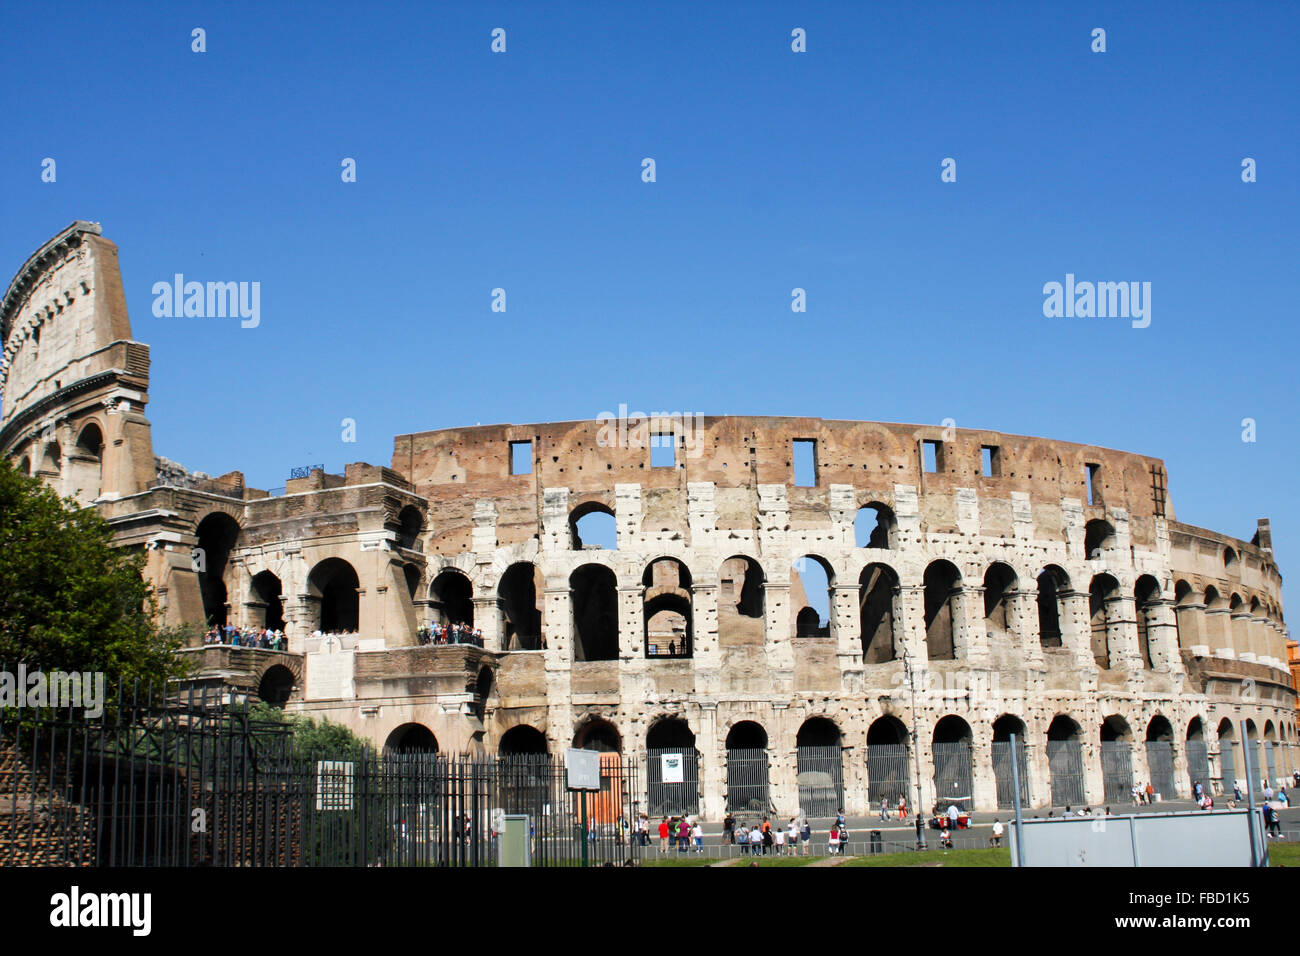 ROME, ITALY- JUNE 2, 2012: Unidentified people by Colloseum in Rome, Italy. It is most remarkable landmark of Rome and Italy. Th Stock Photo